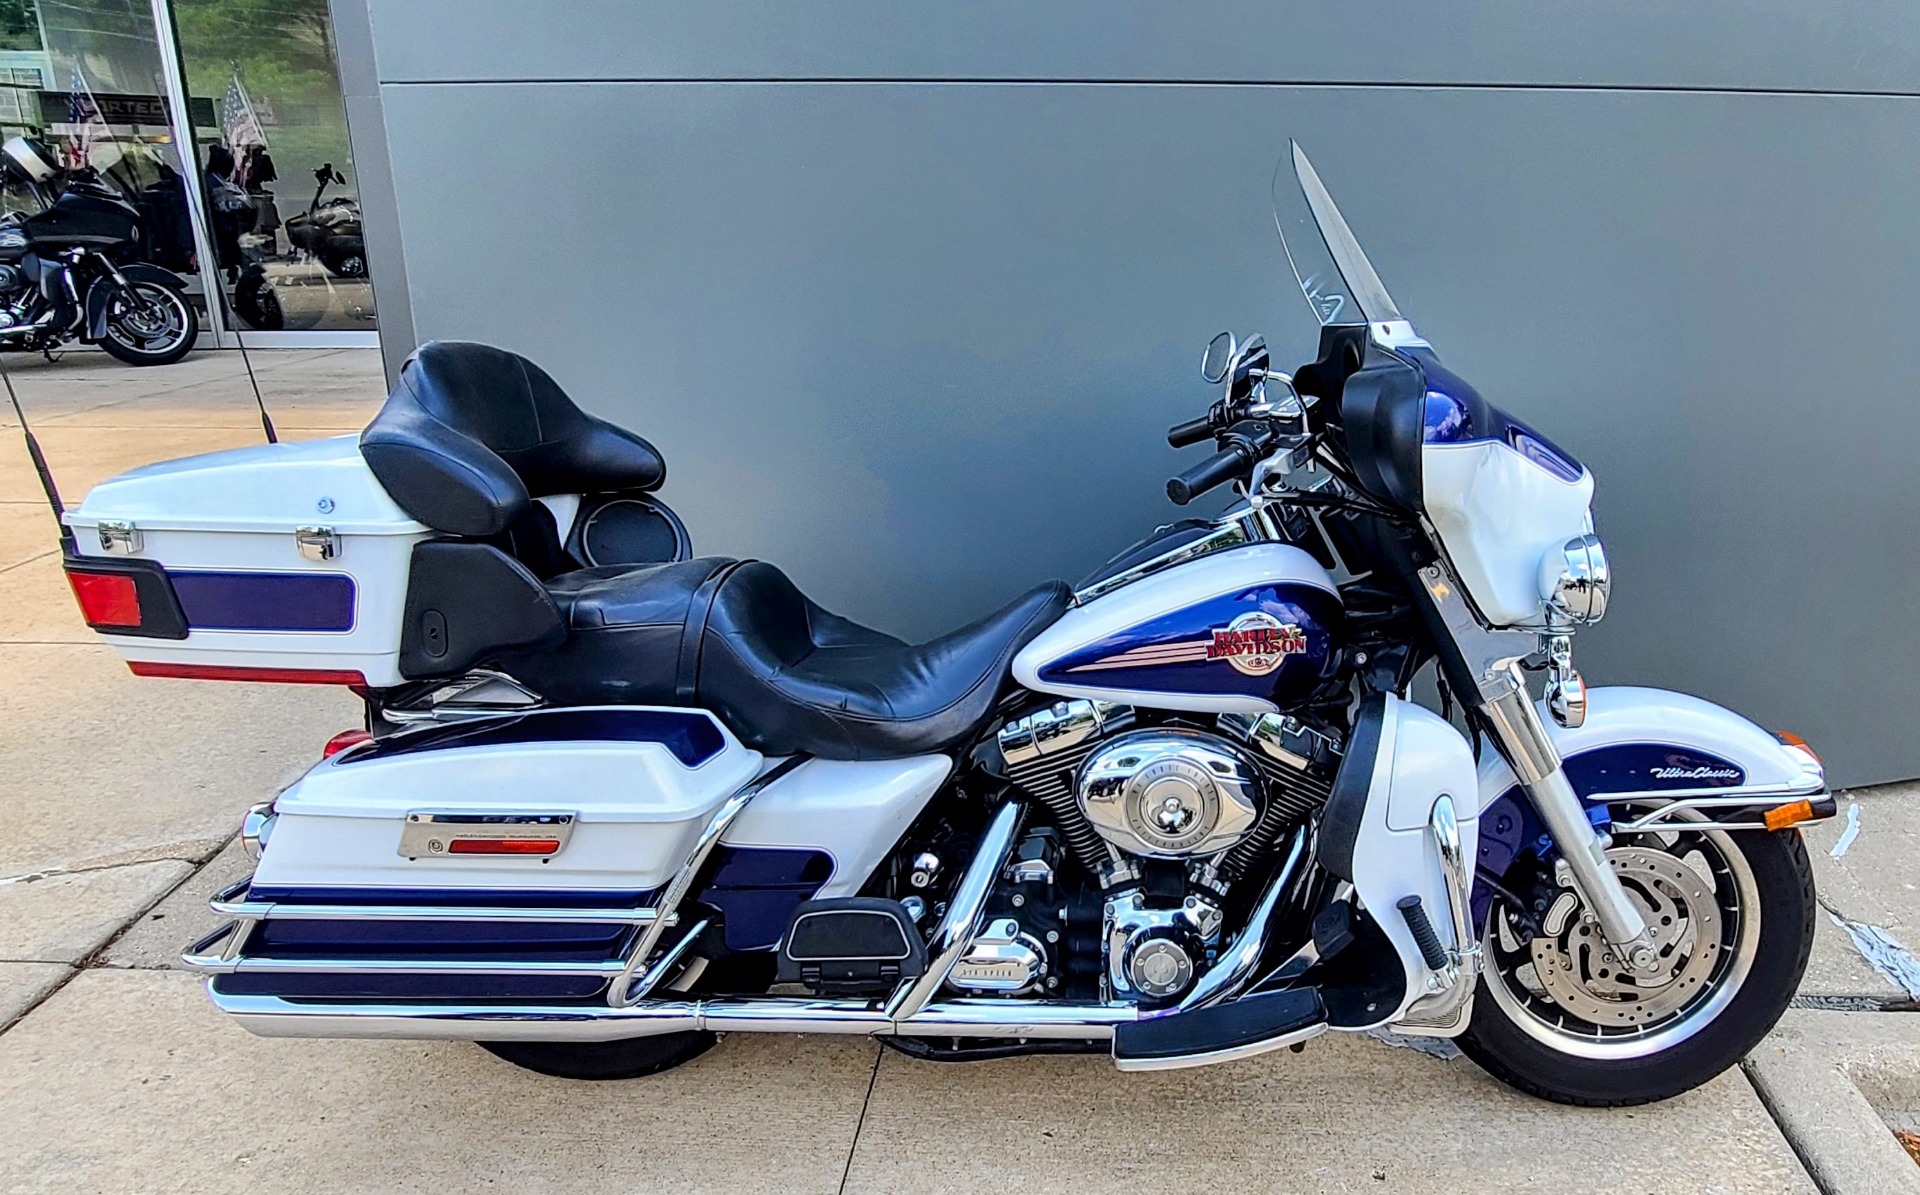 Used 2007 Harley Davidson Ultra Classic Electra Glide Two Tone White Gold Pearl Deep Cobalt Pearl Price Specs Motorcycles In Lake Villa Il Har699513